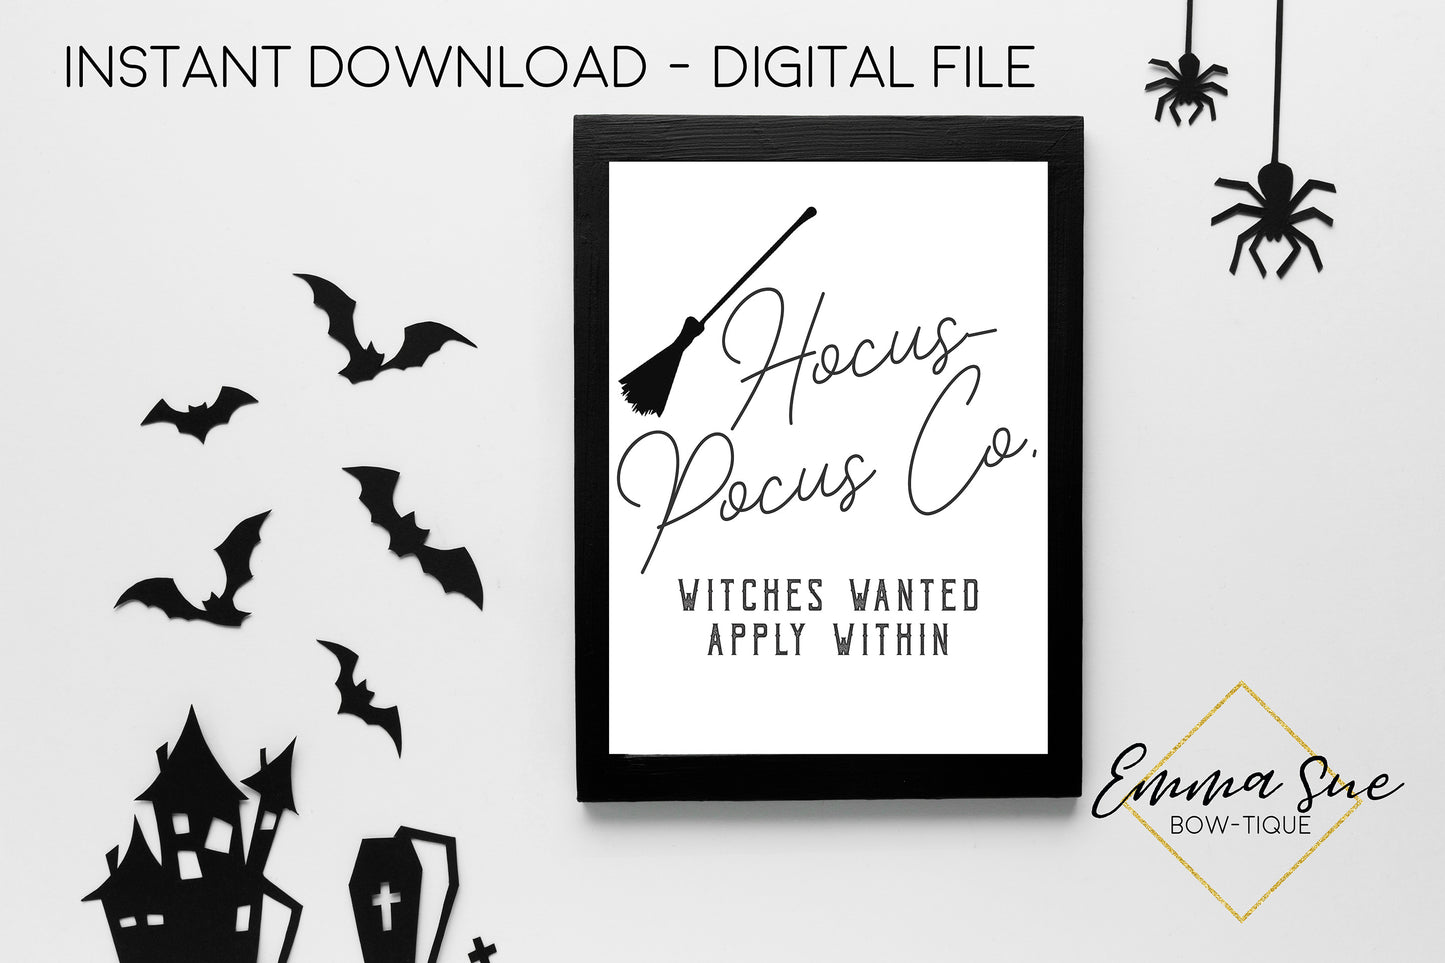 Hocus Pocus Co. Witches Wanted Apply within - Halloween Decoration Printable Art Sign - Digital File